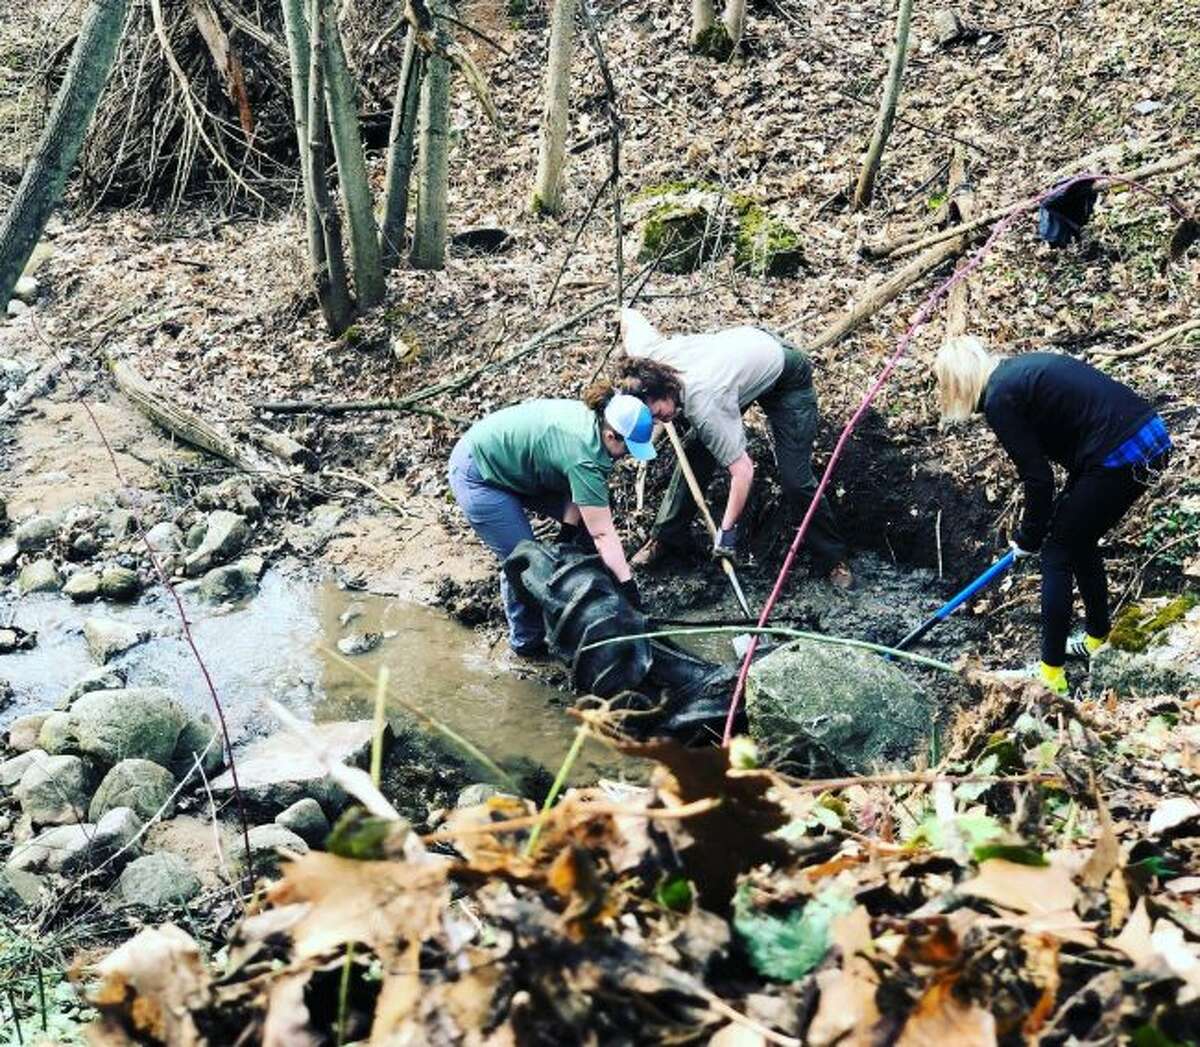 Volunteers work to remove a tractor tire from a creek along the Fred Meijer White Pine Trail on Sunday.